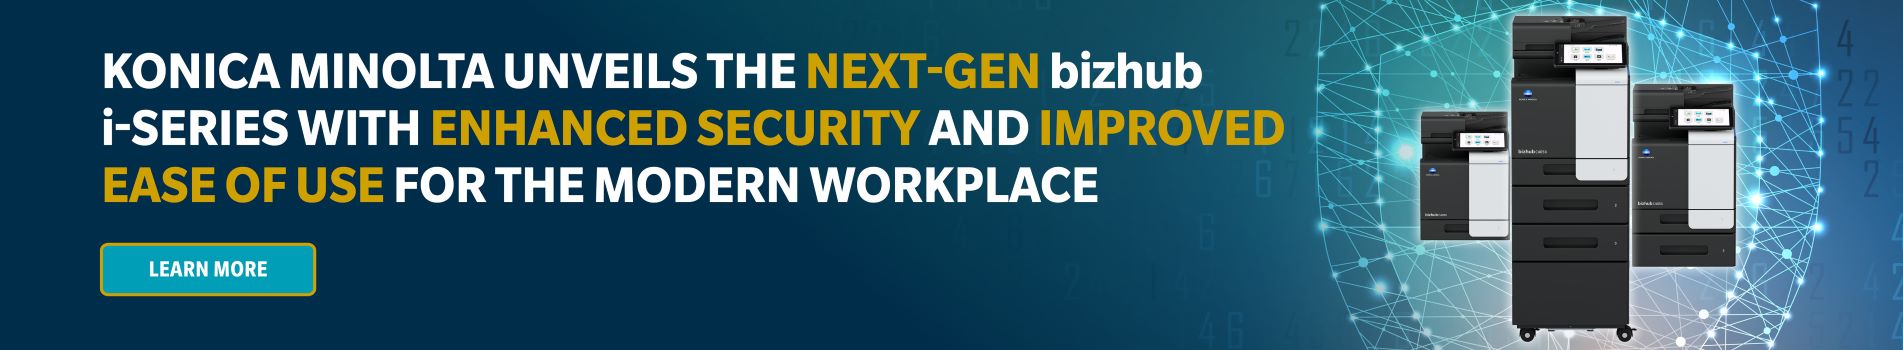 Konica Minolta unveils the next-gen bizhub i-series with enhanced security and improved ease of use for the modern workplace